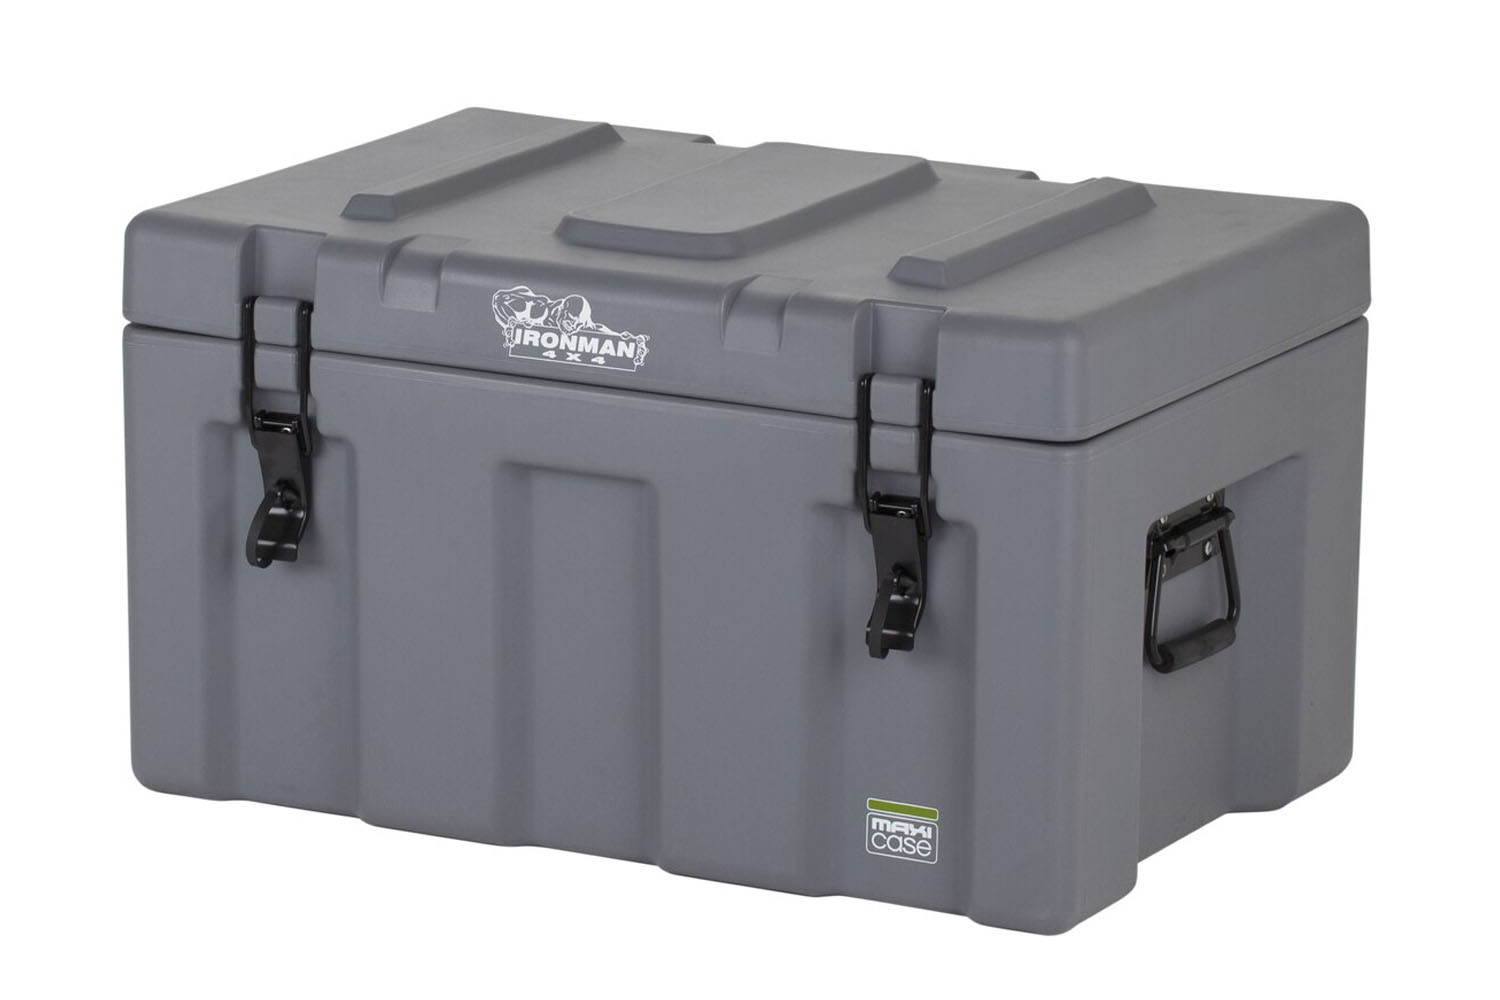 Can you lock these rugged storage containers?